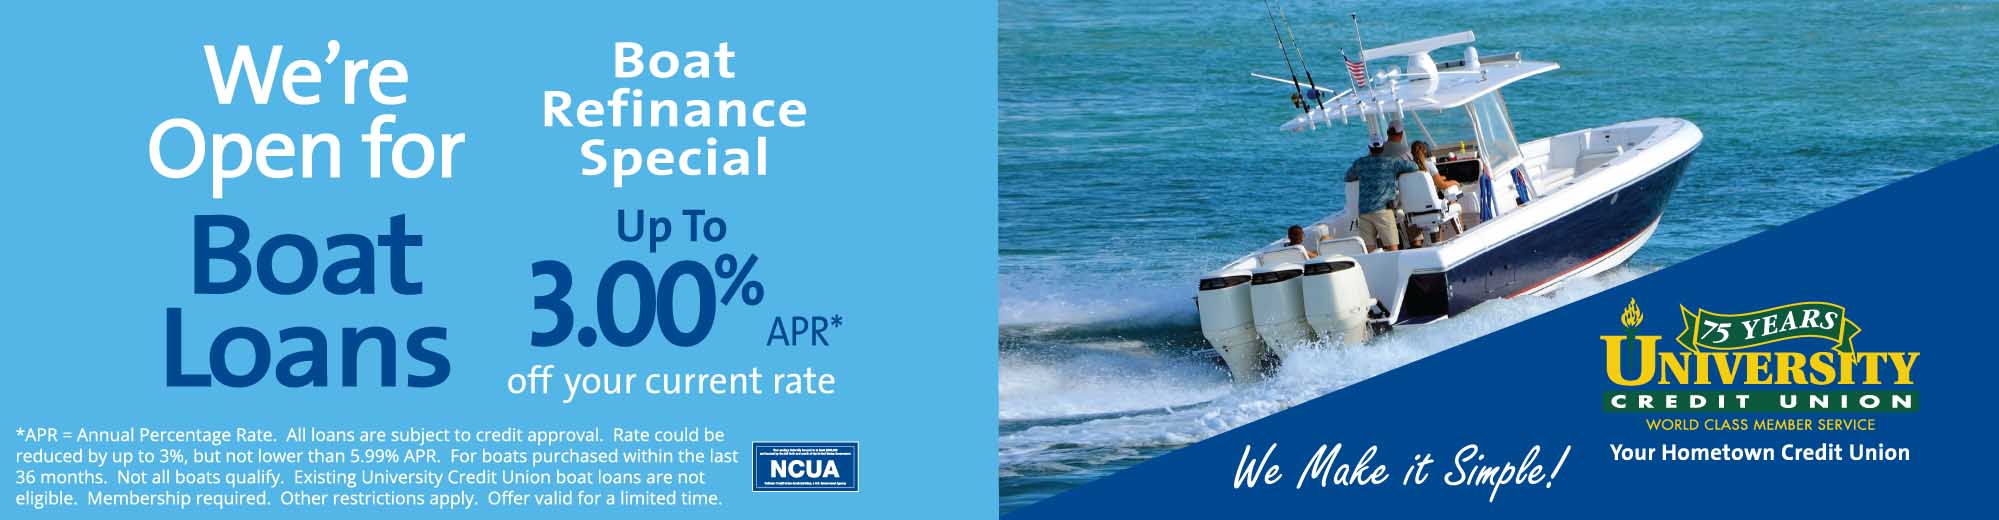 Save Up to 3.00% Off Your Boat Loan